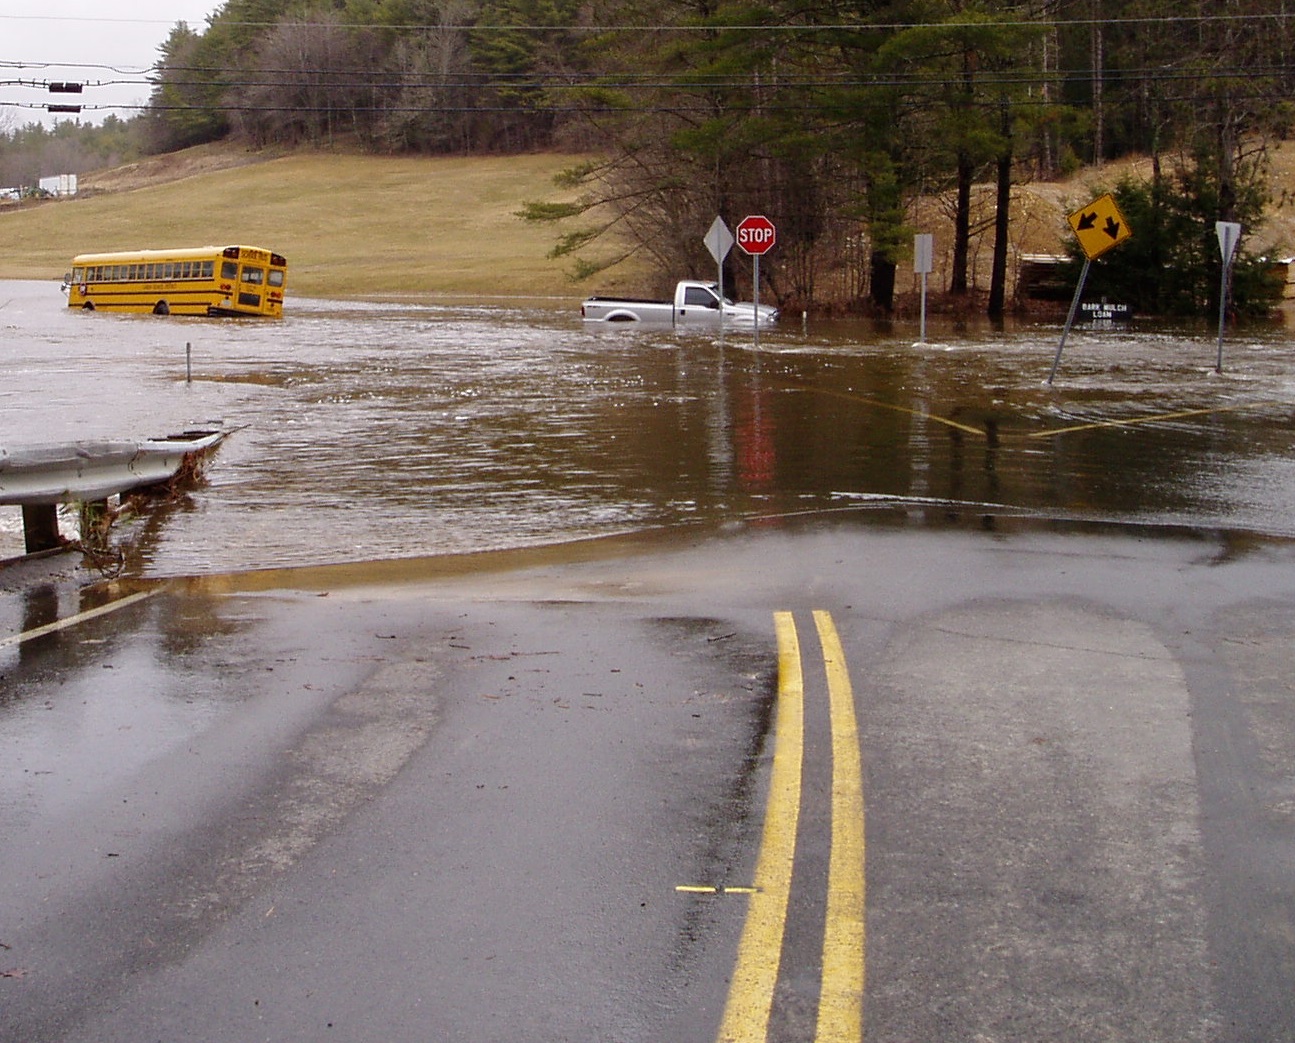 A bus is surrounded by flooding waters.